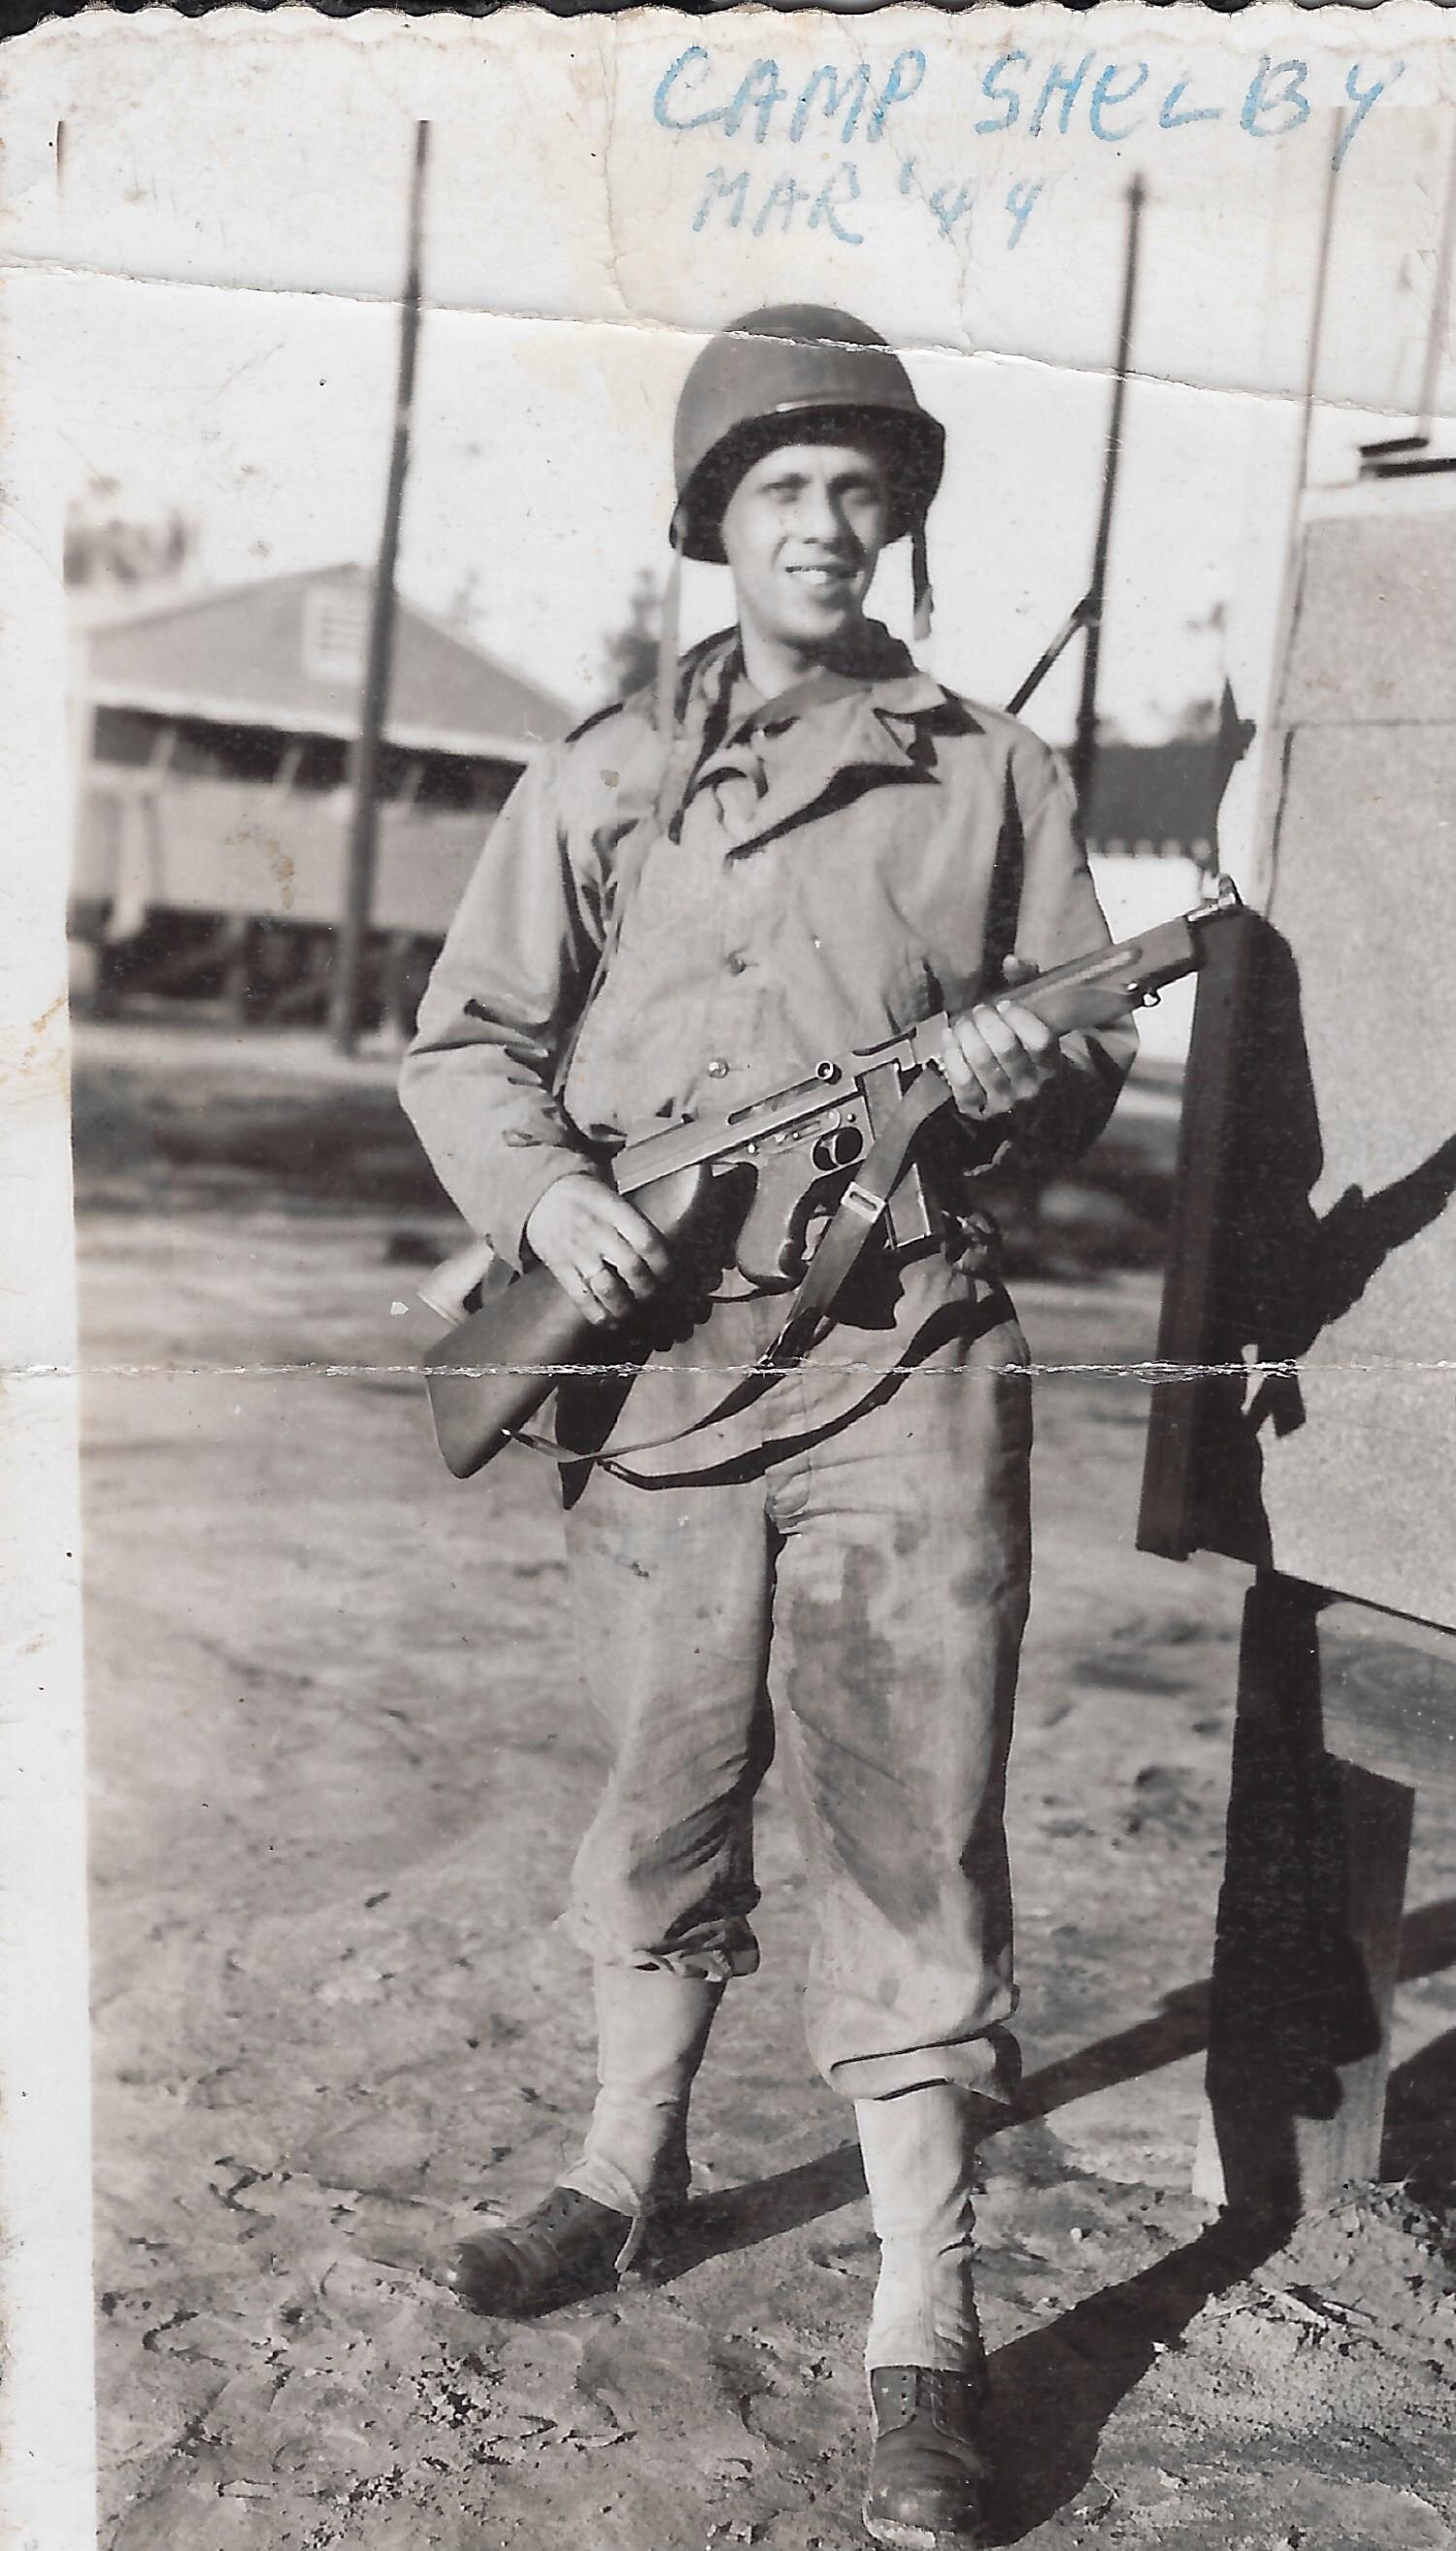 Dad Camp Shelby March 1944.jpg